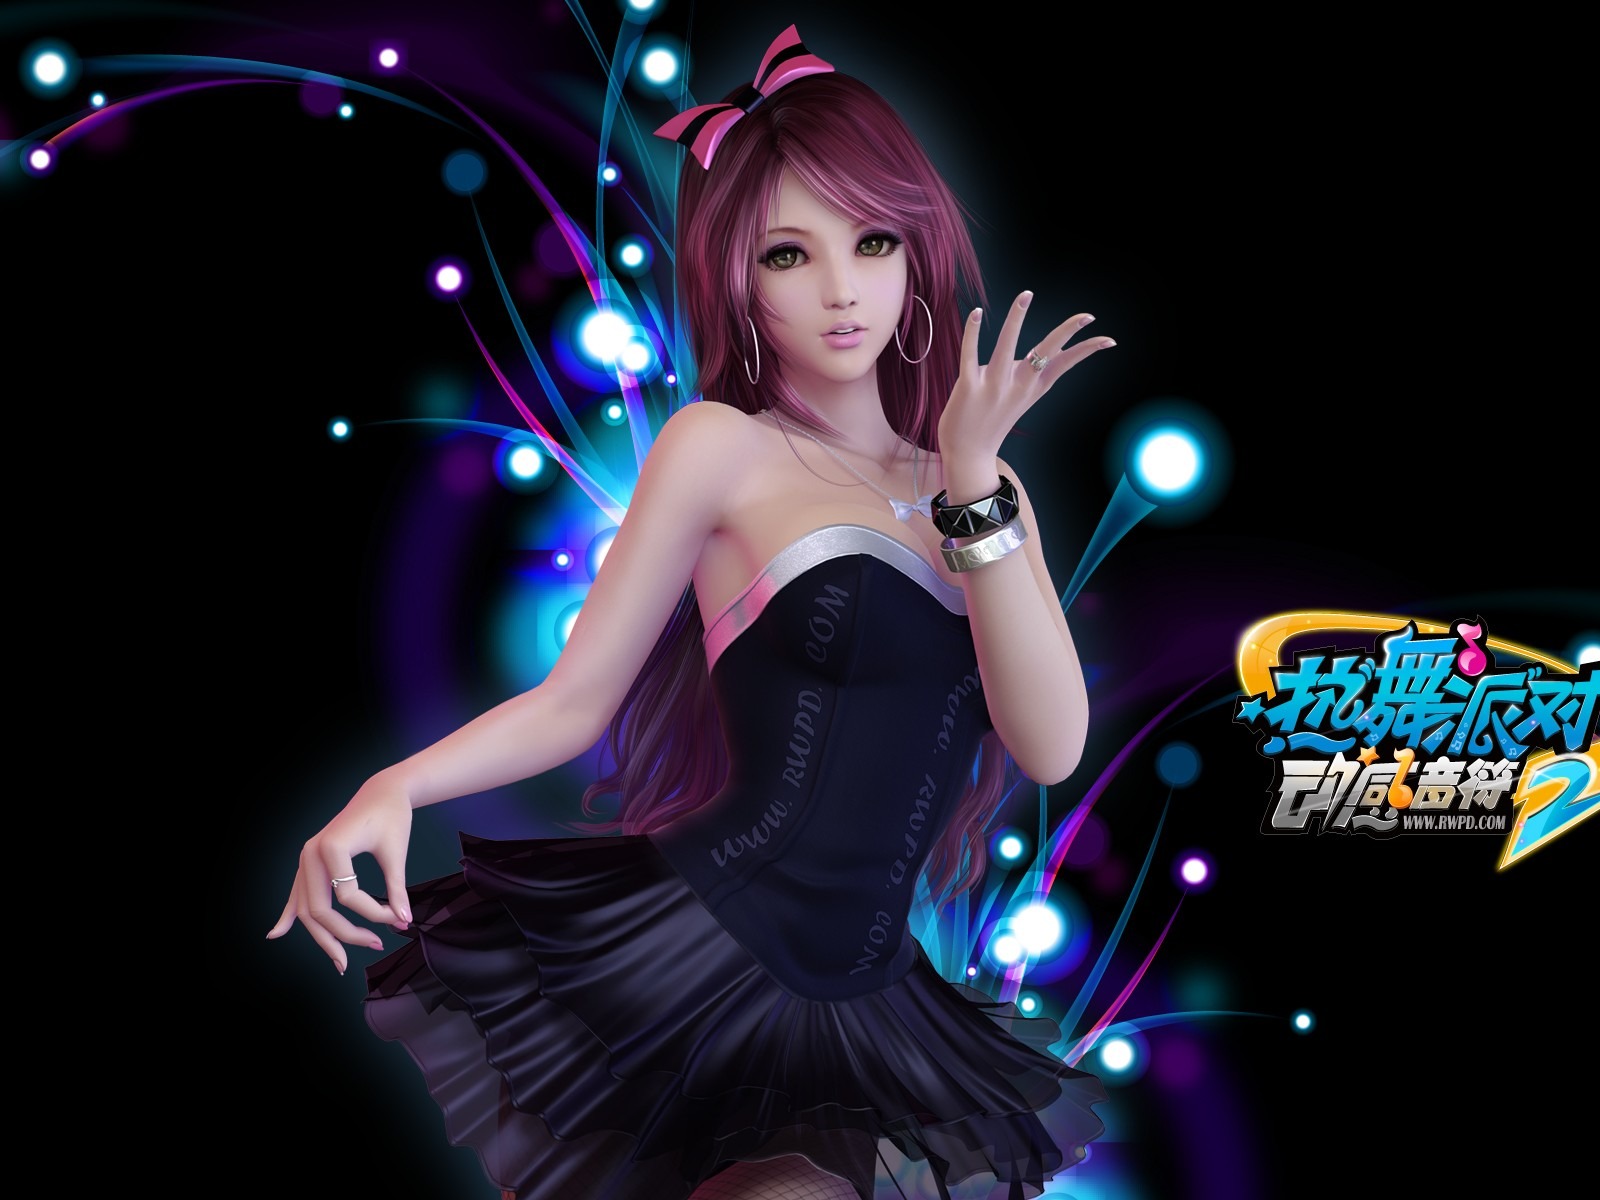 Online game Hot Dance Party II official wallpapers #31 - 1600x1200